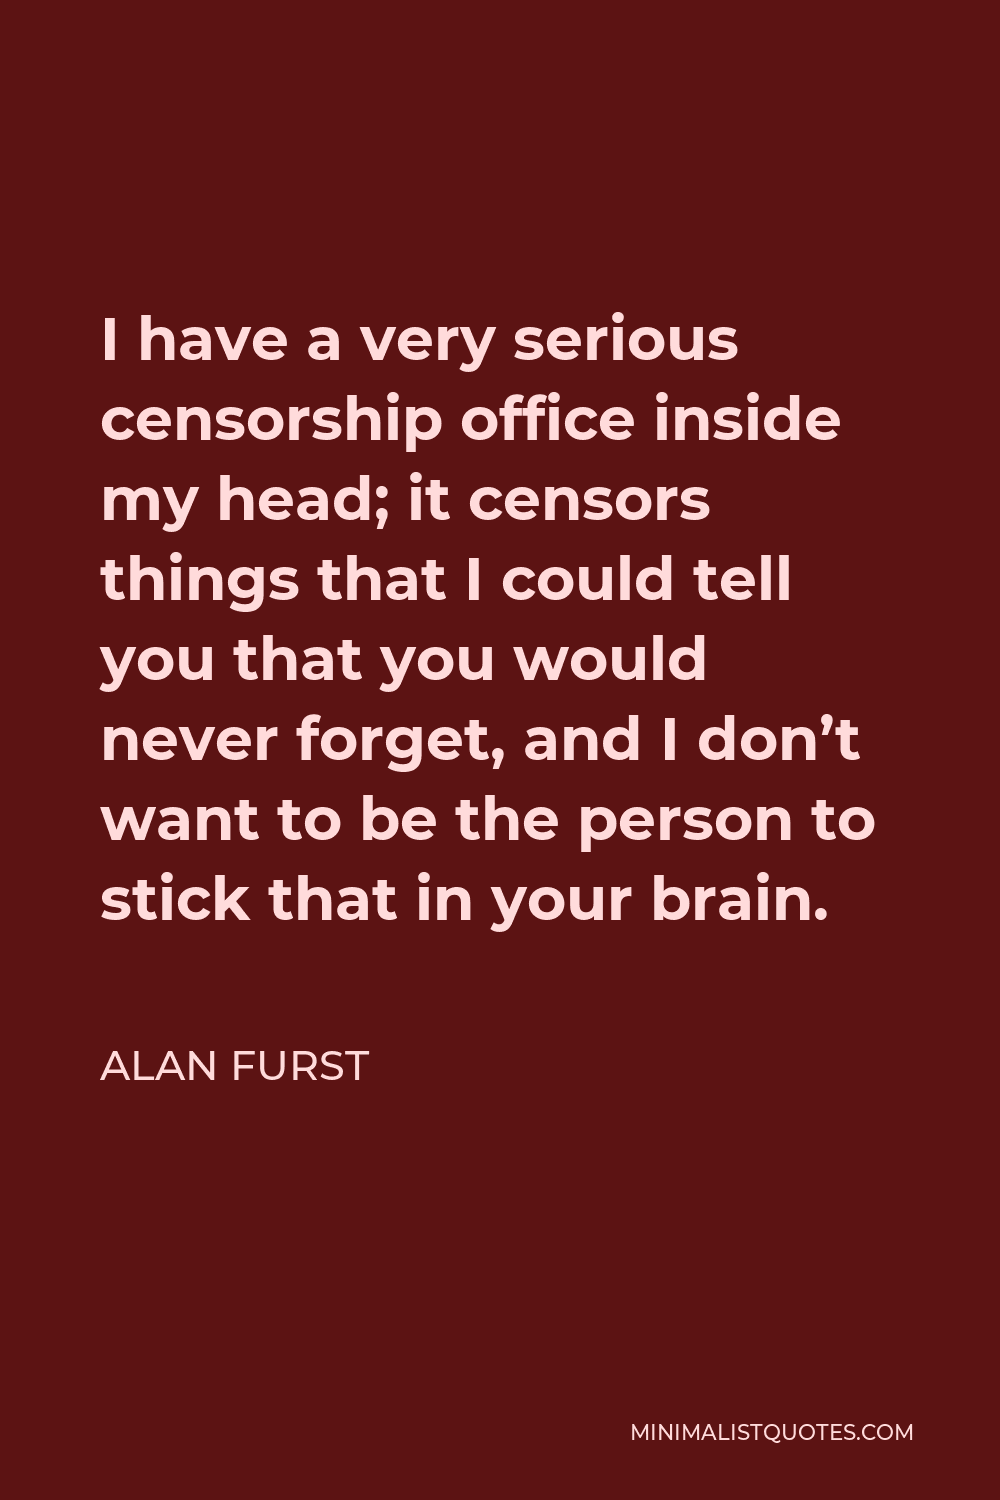 Alan Furst Quote - I have a very serious censorship office inside my head; it censors things that I could tell you that you would never forget, and I don’t want to be the person to stick that in your brain.